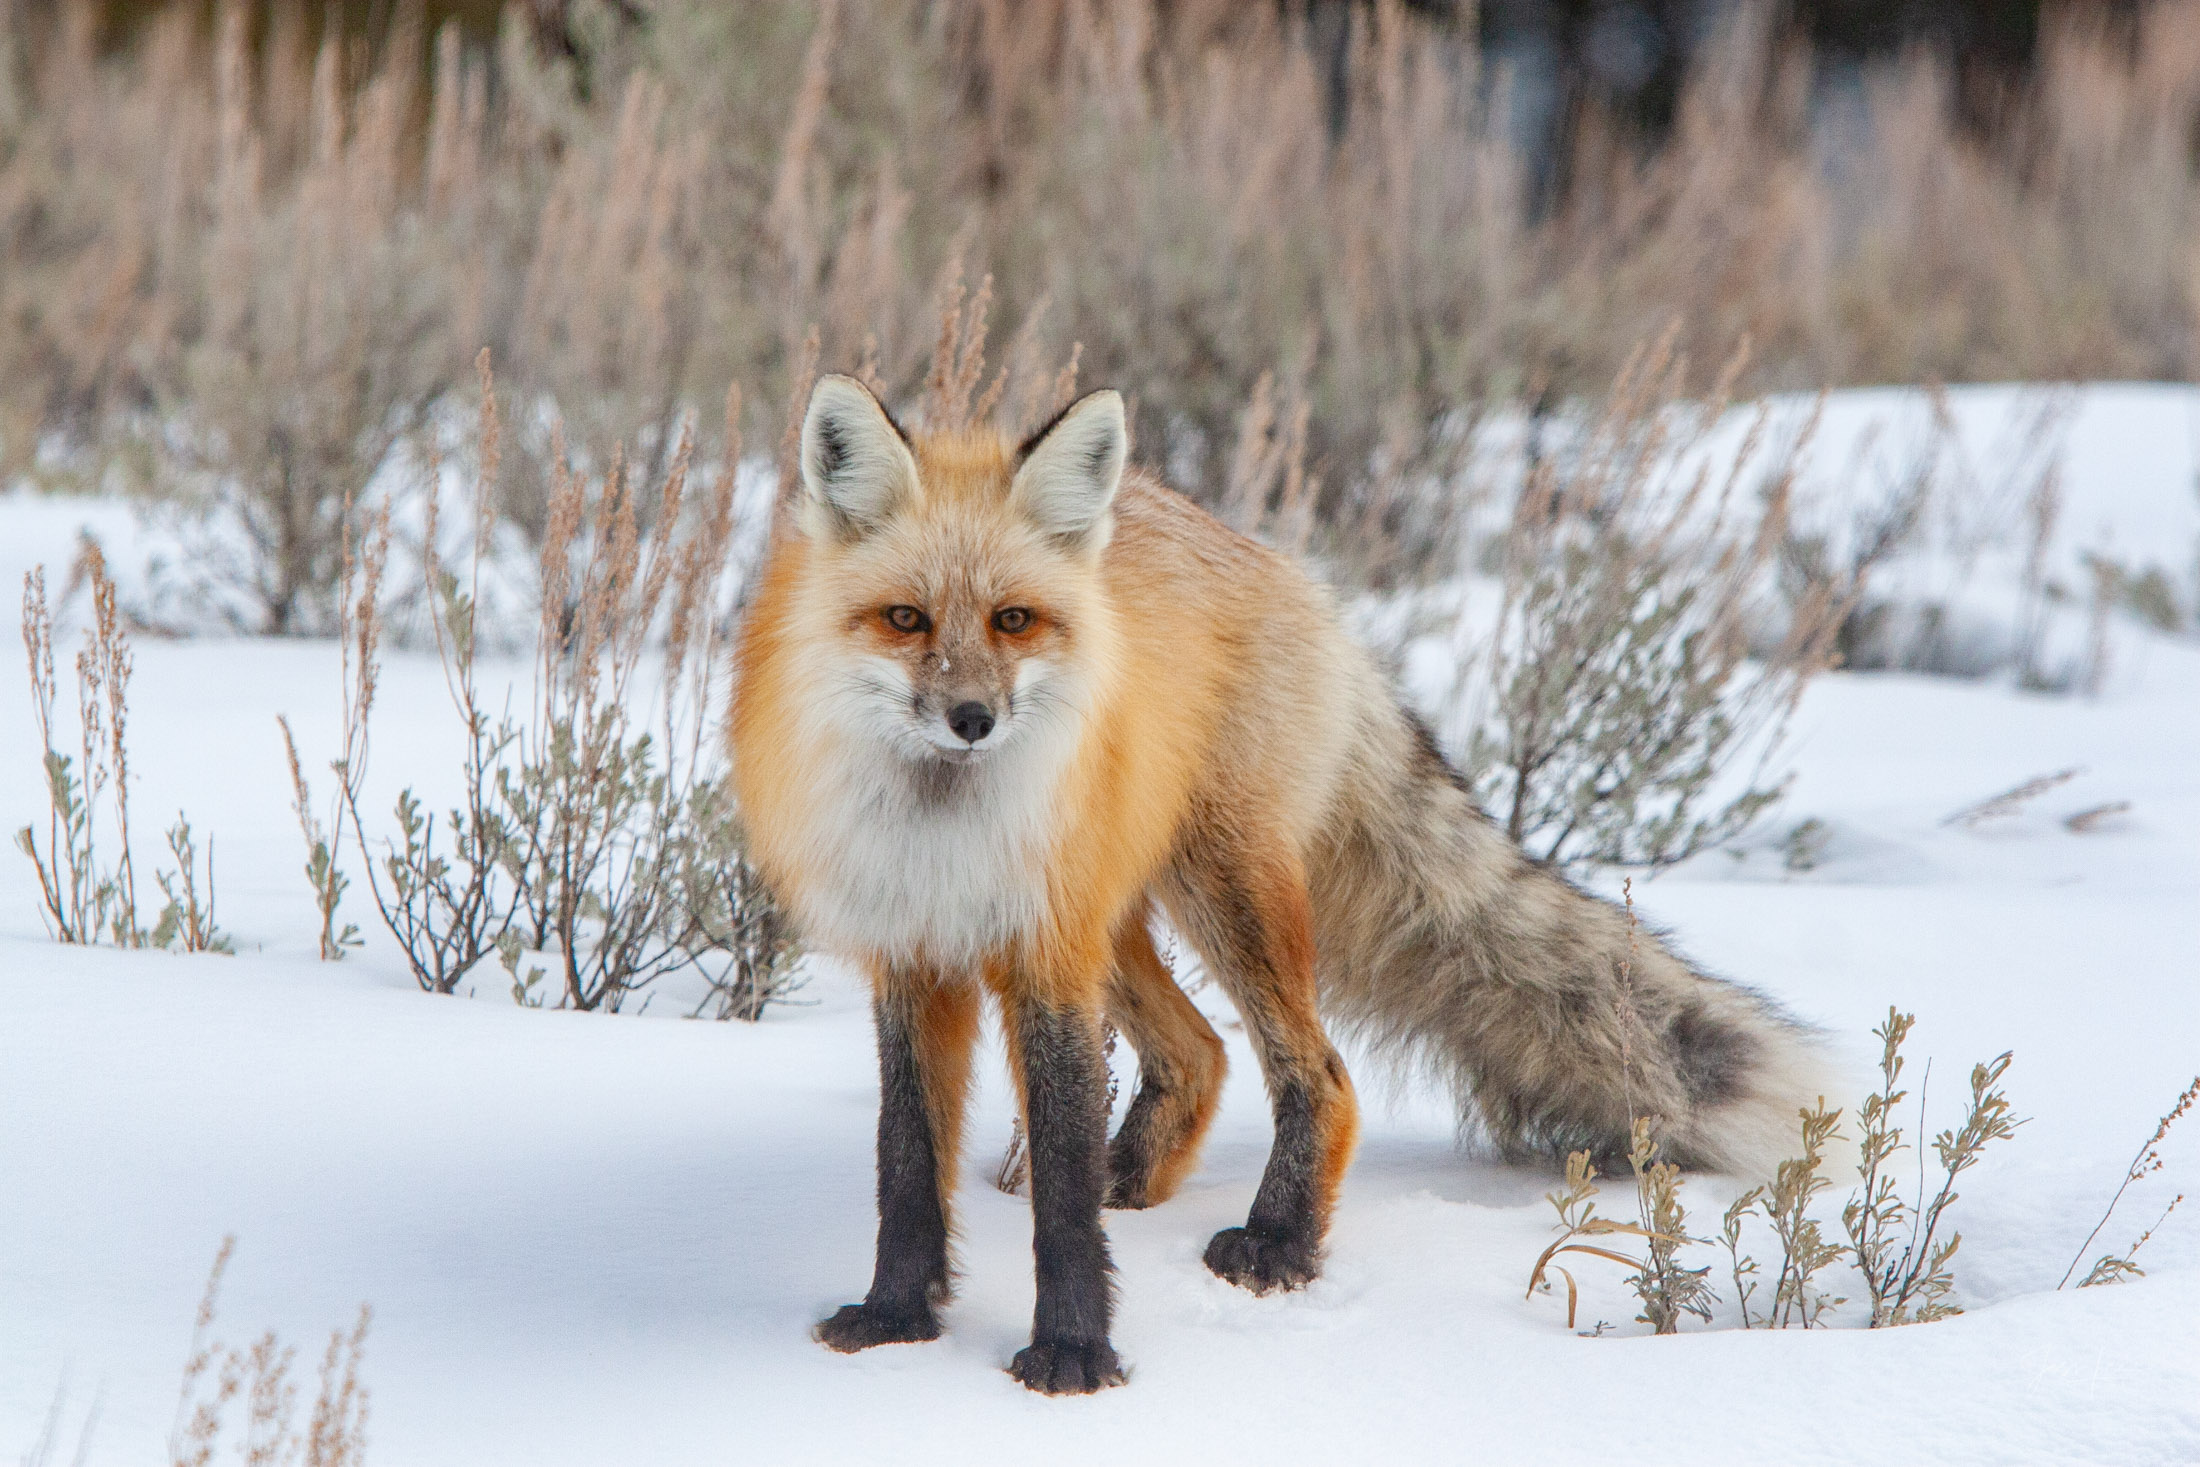 Fox Photo 16 is presented in Limited Edition of 250 Exclusive high-resolution Museum Quality Fine Art Prints. Wildlife Photo...